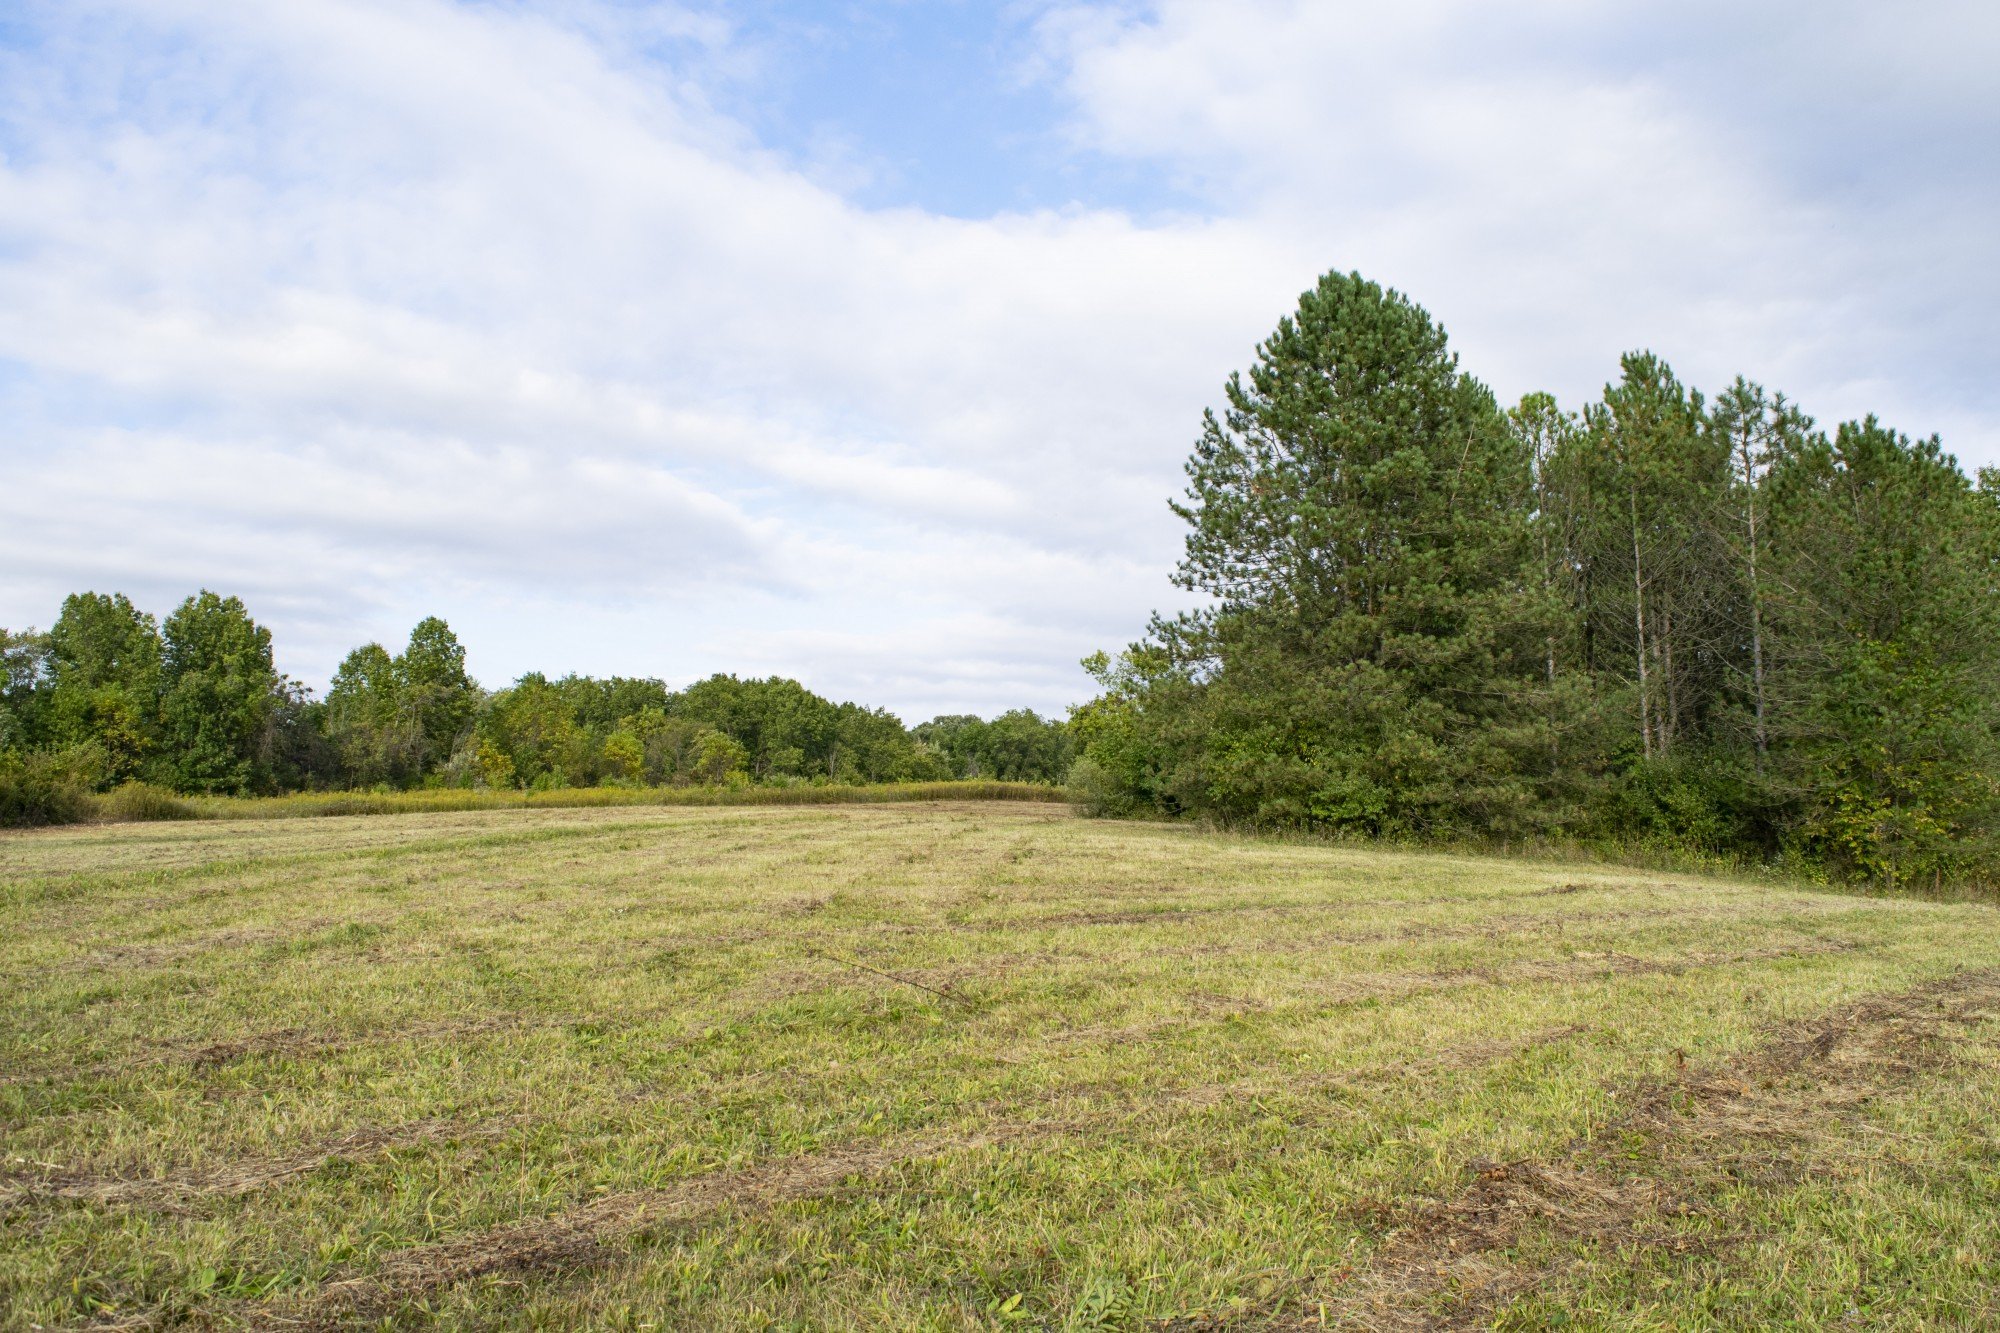 Sturges Property Group - Dickie Road Land Development in SW Fort Wayne (16 acres)